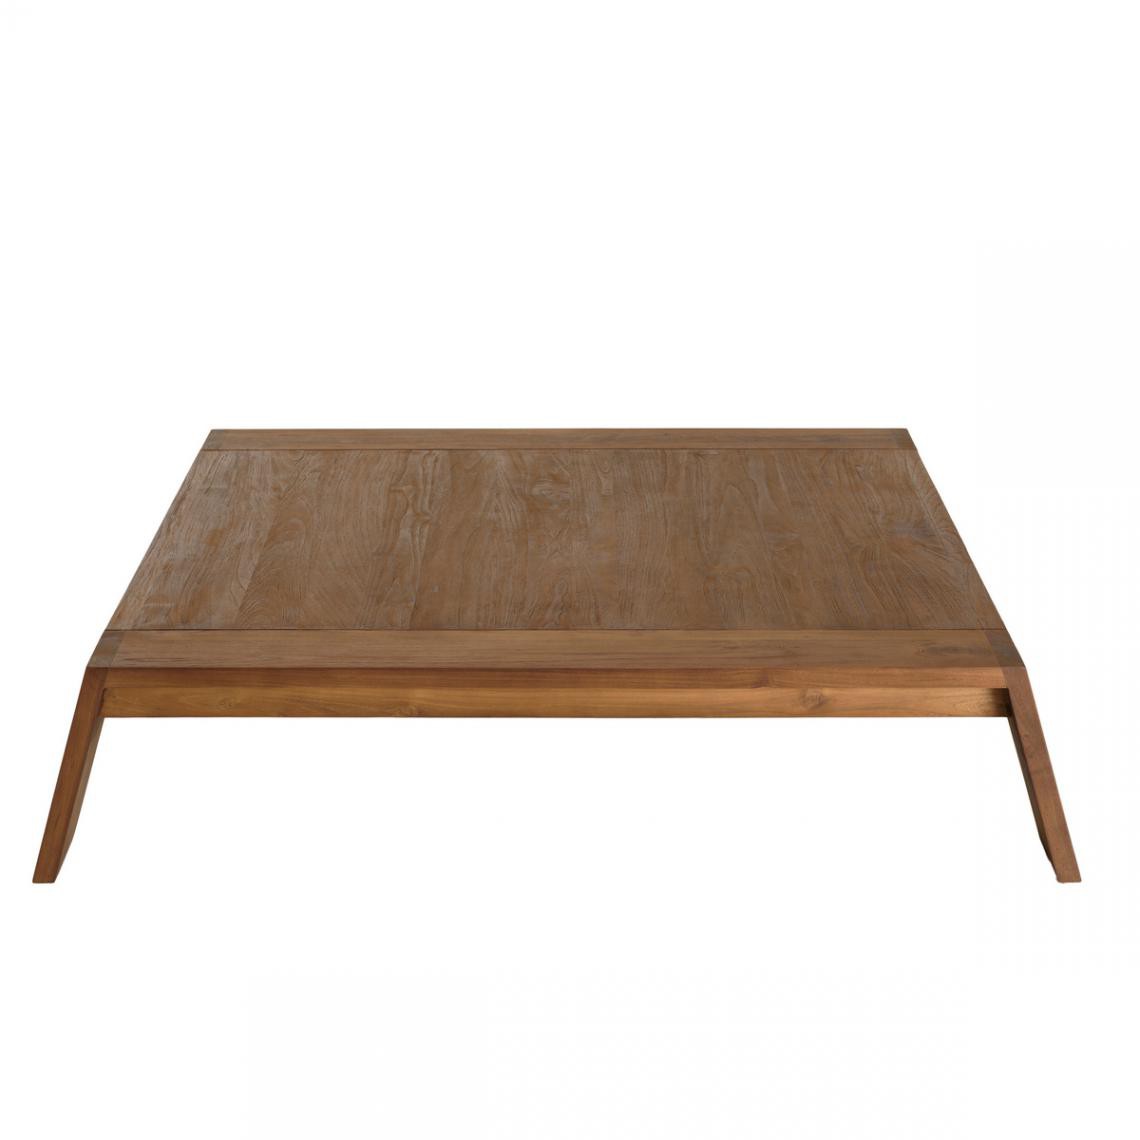 MACABANE - Table basse SIXTINE rectangulaire - Tables basses